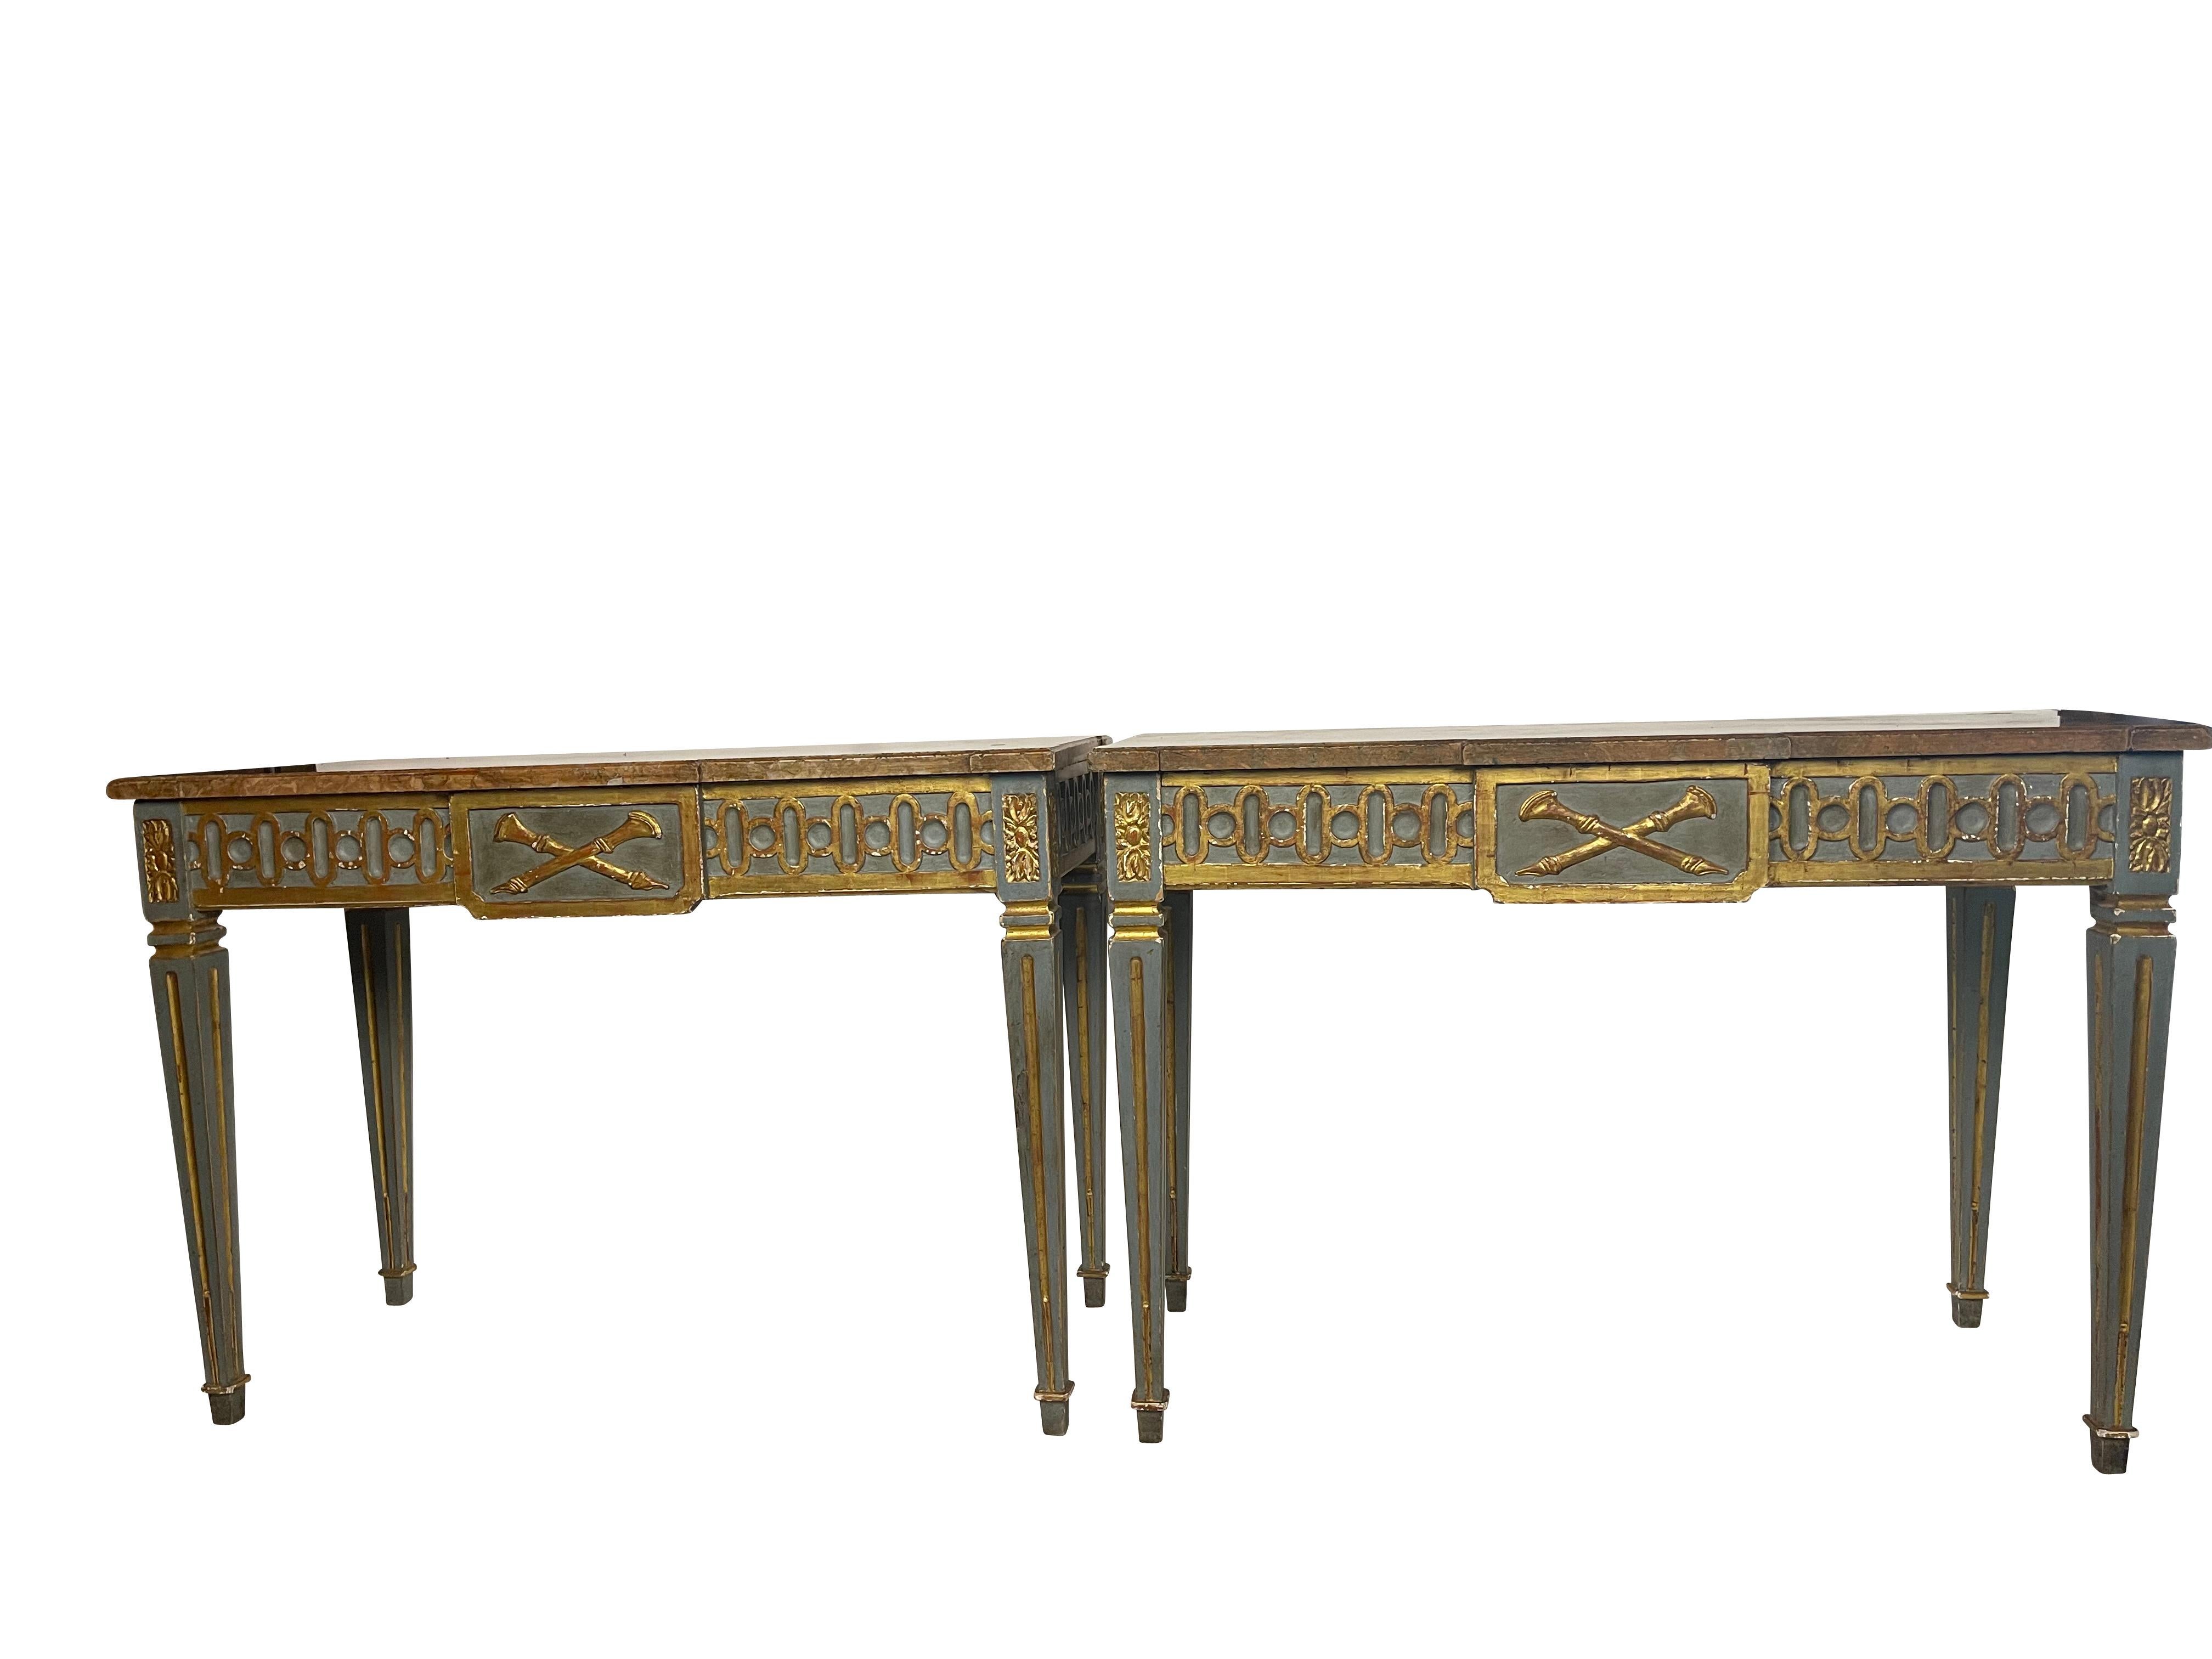 Exceptional 18th - 19th Century pair of Neoclassical gilt and painted console tables with rose marble tops. Green/ blue paint with gilt trip throughout. Reeded legs with rosette decoration on the corners. Crossed gilt hunting horn design on center